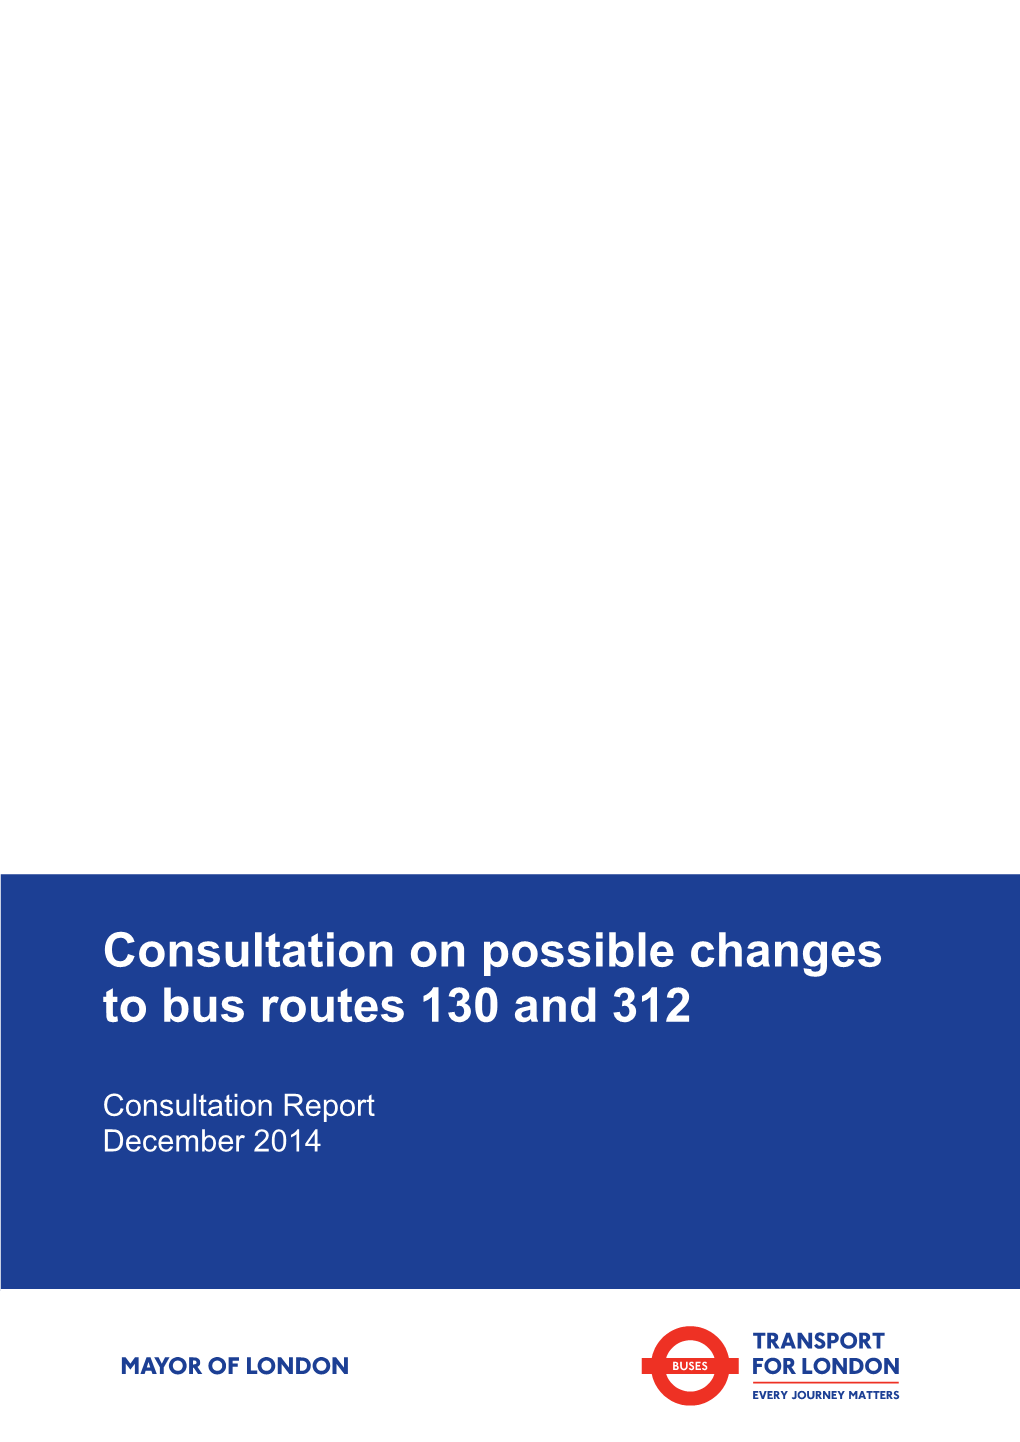 Consultation on Possible Changes to Bus Routes 130 and 312